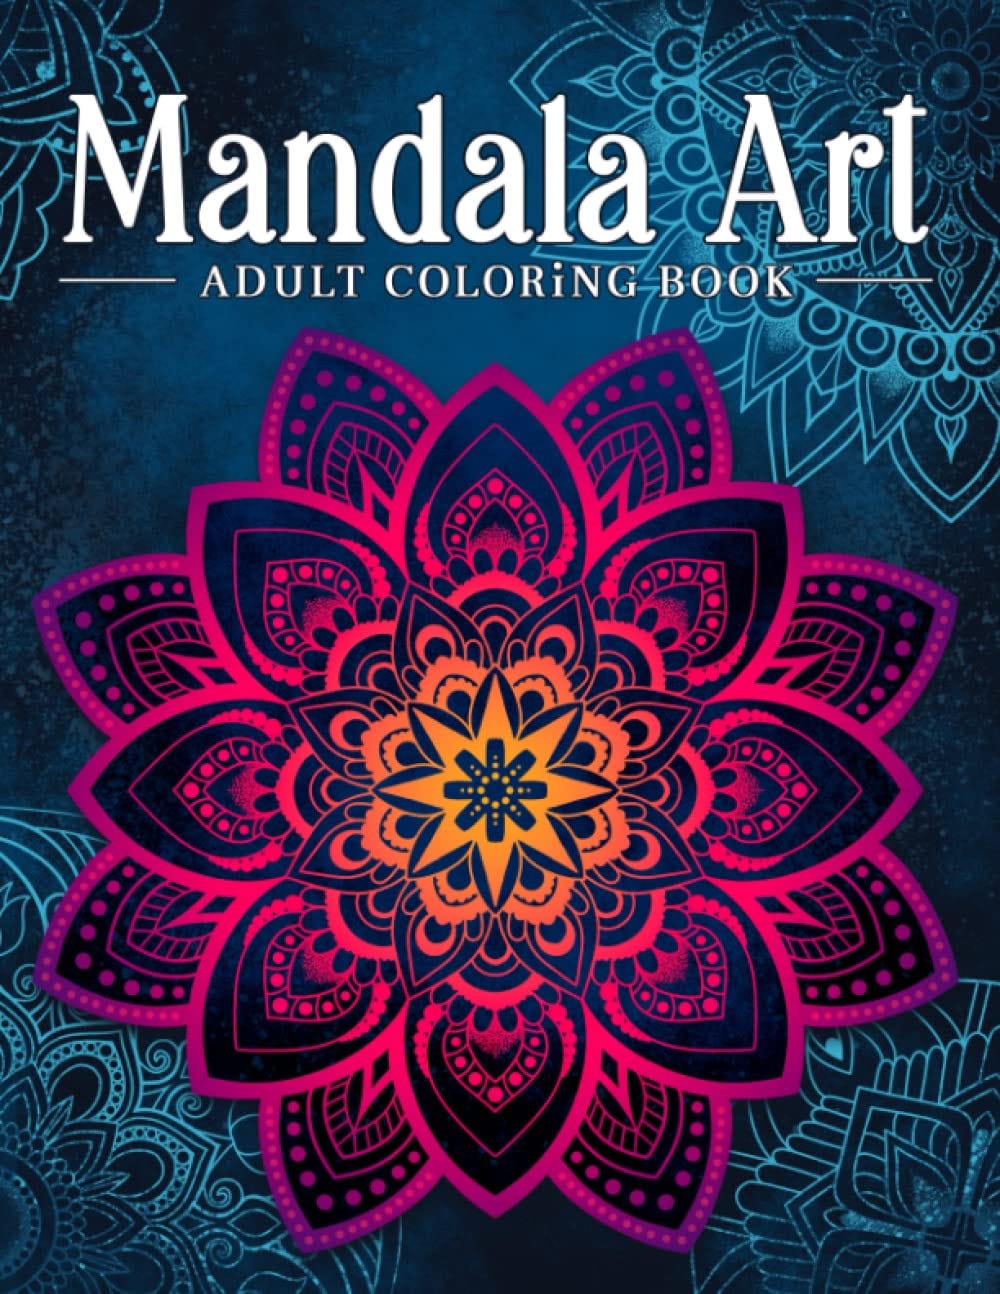 MANDALA Adult Coloring Book: 30 Coloring Mandalas To Relieve Stress And To  Achieve A Deep Sense Of Calm a book by Wonderful Press